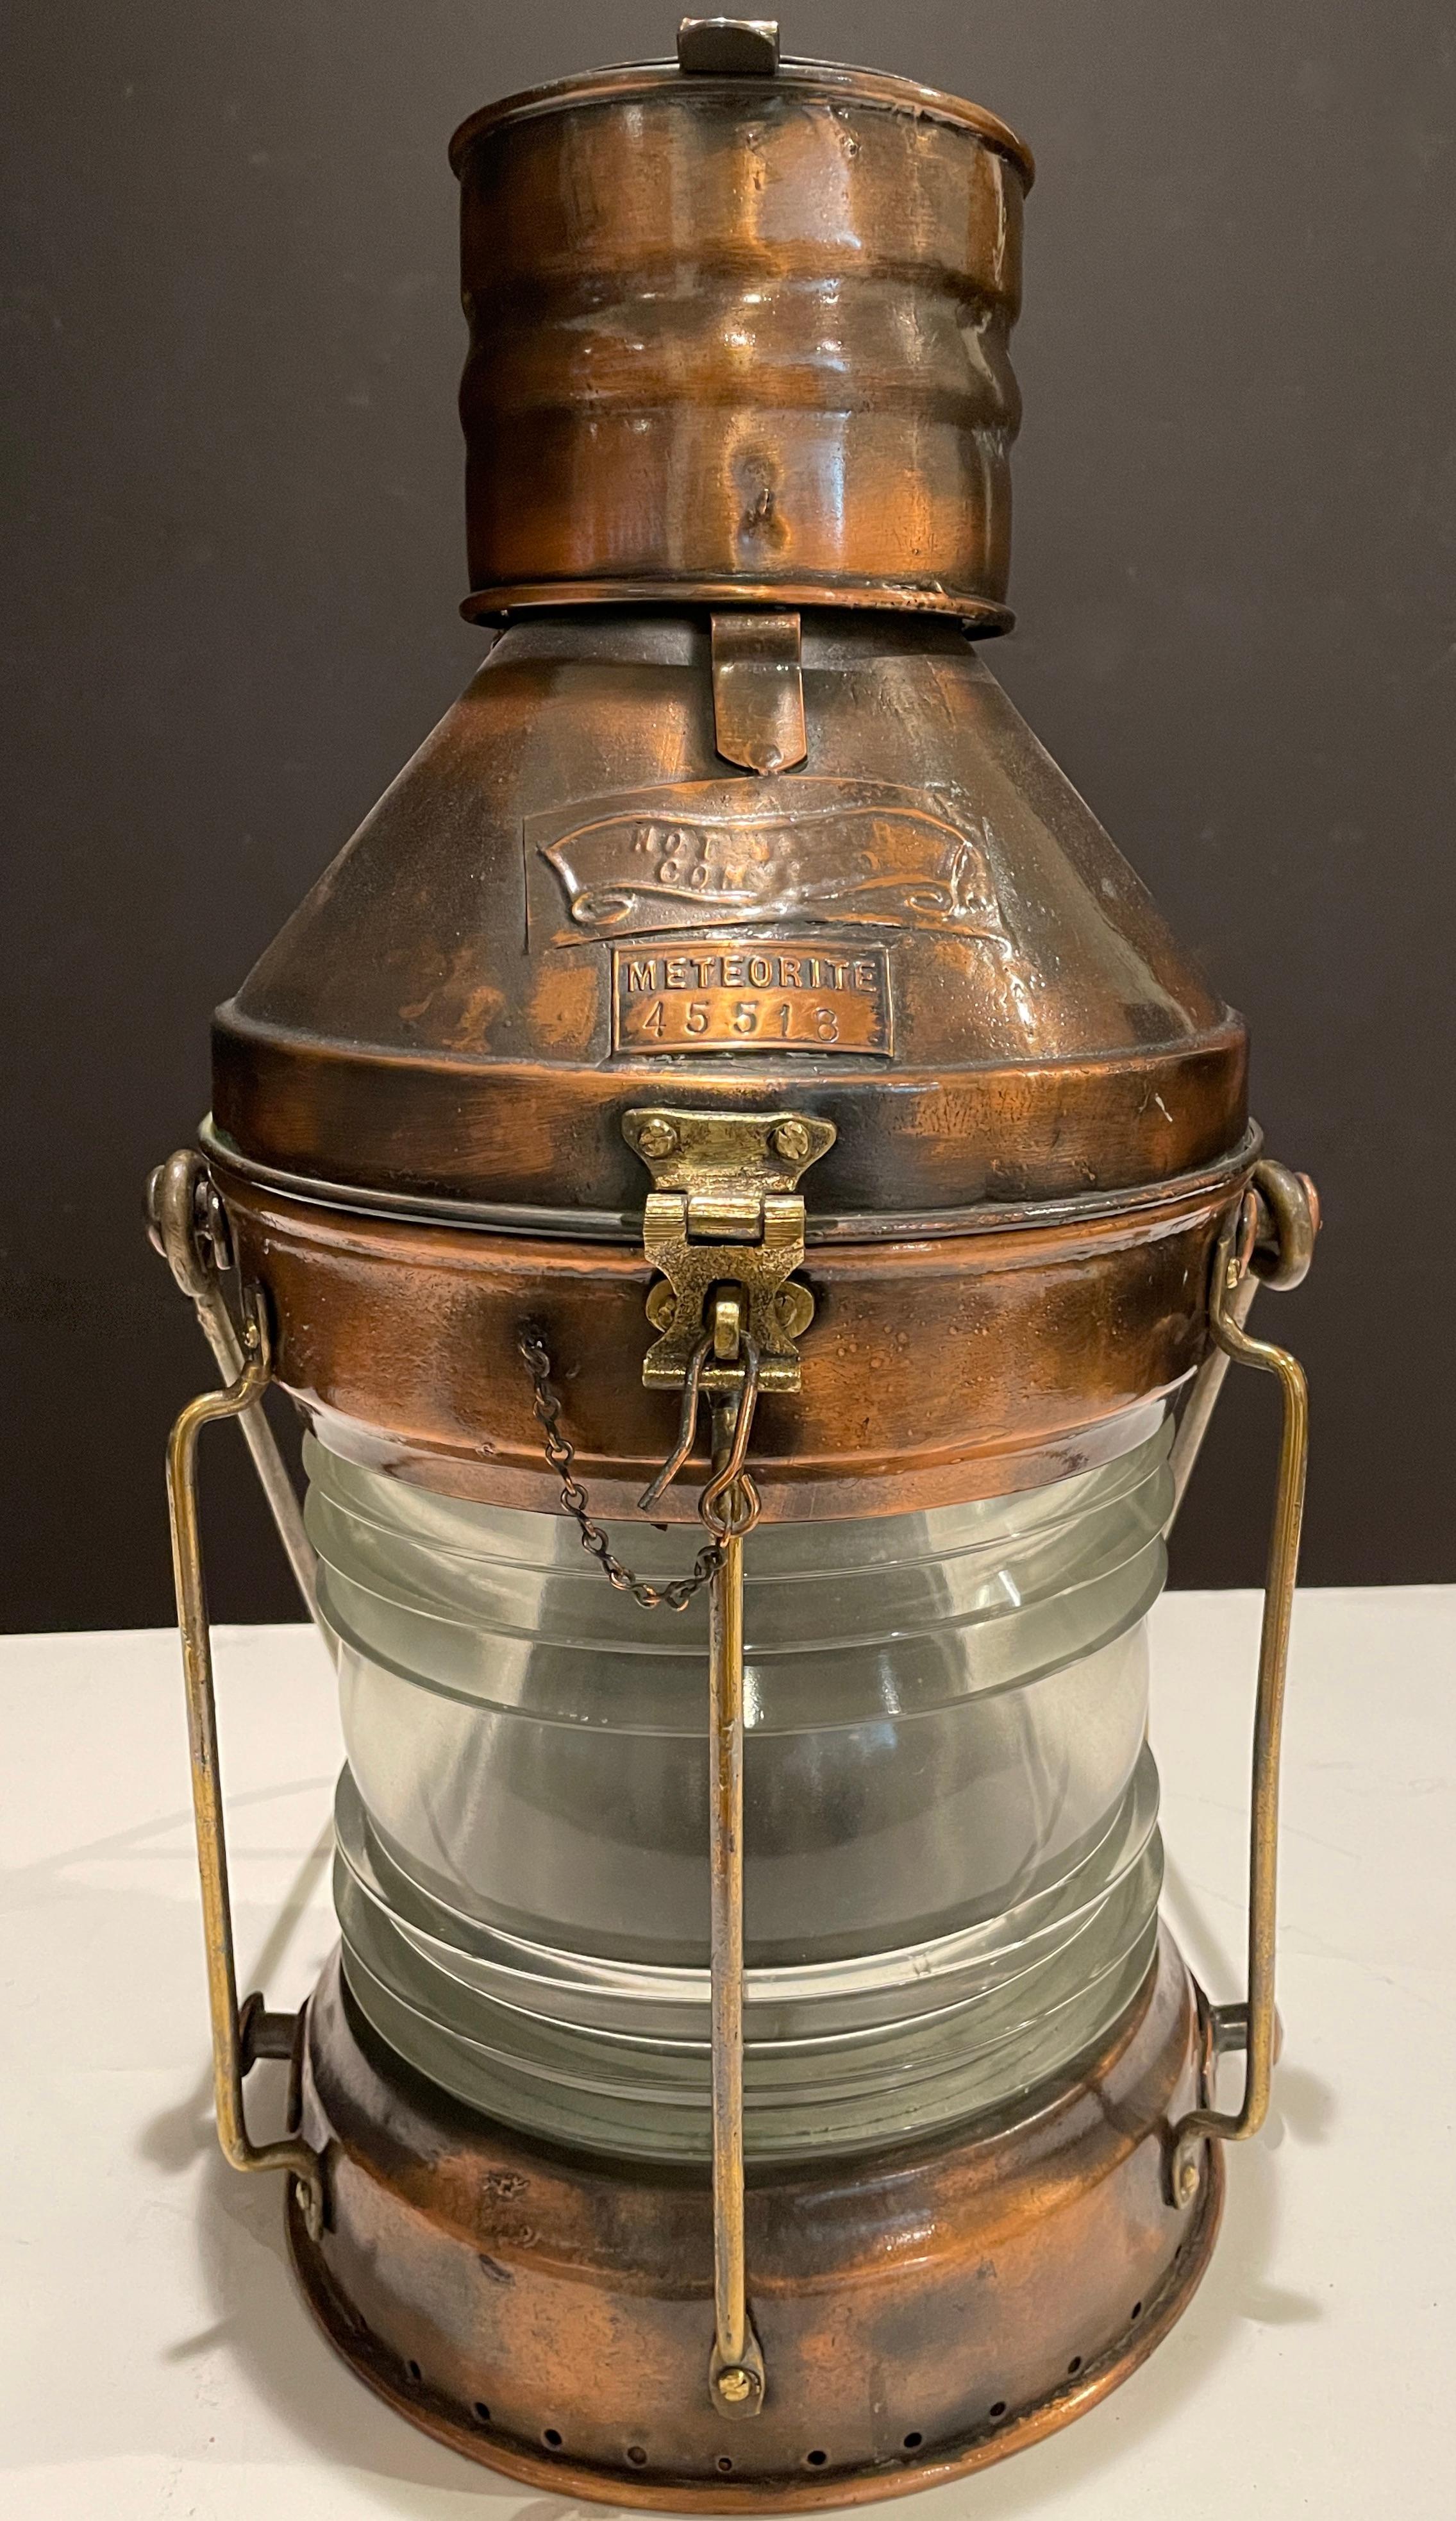 Massive late 19th century copper and brass ship's lantern by the English firm Meteorite. With copper maker's badge, fresnel glass lens and brass bail handle. Massive copper ship’s masthead lantern has a hinged top, brass badges and carry handle.